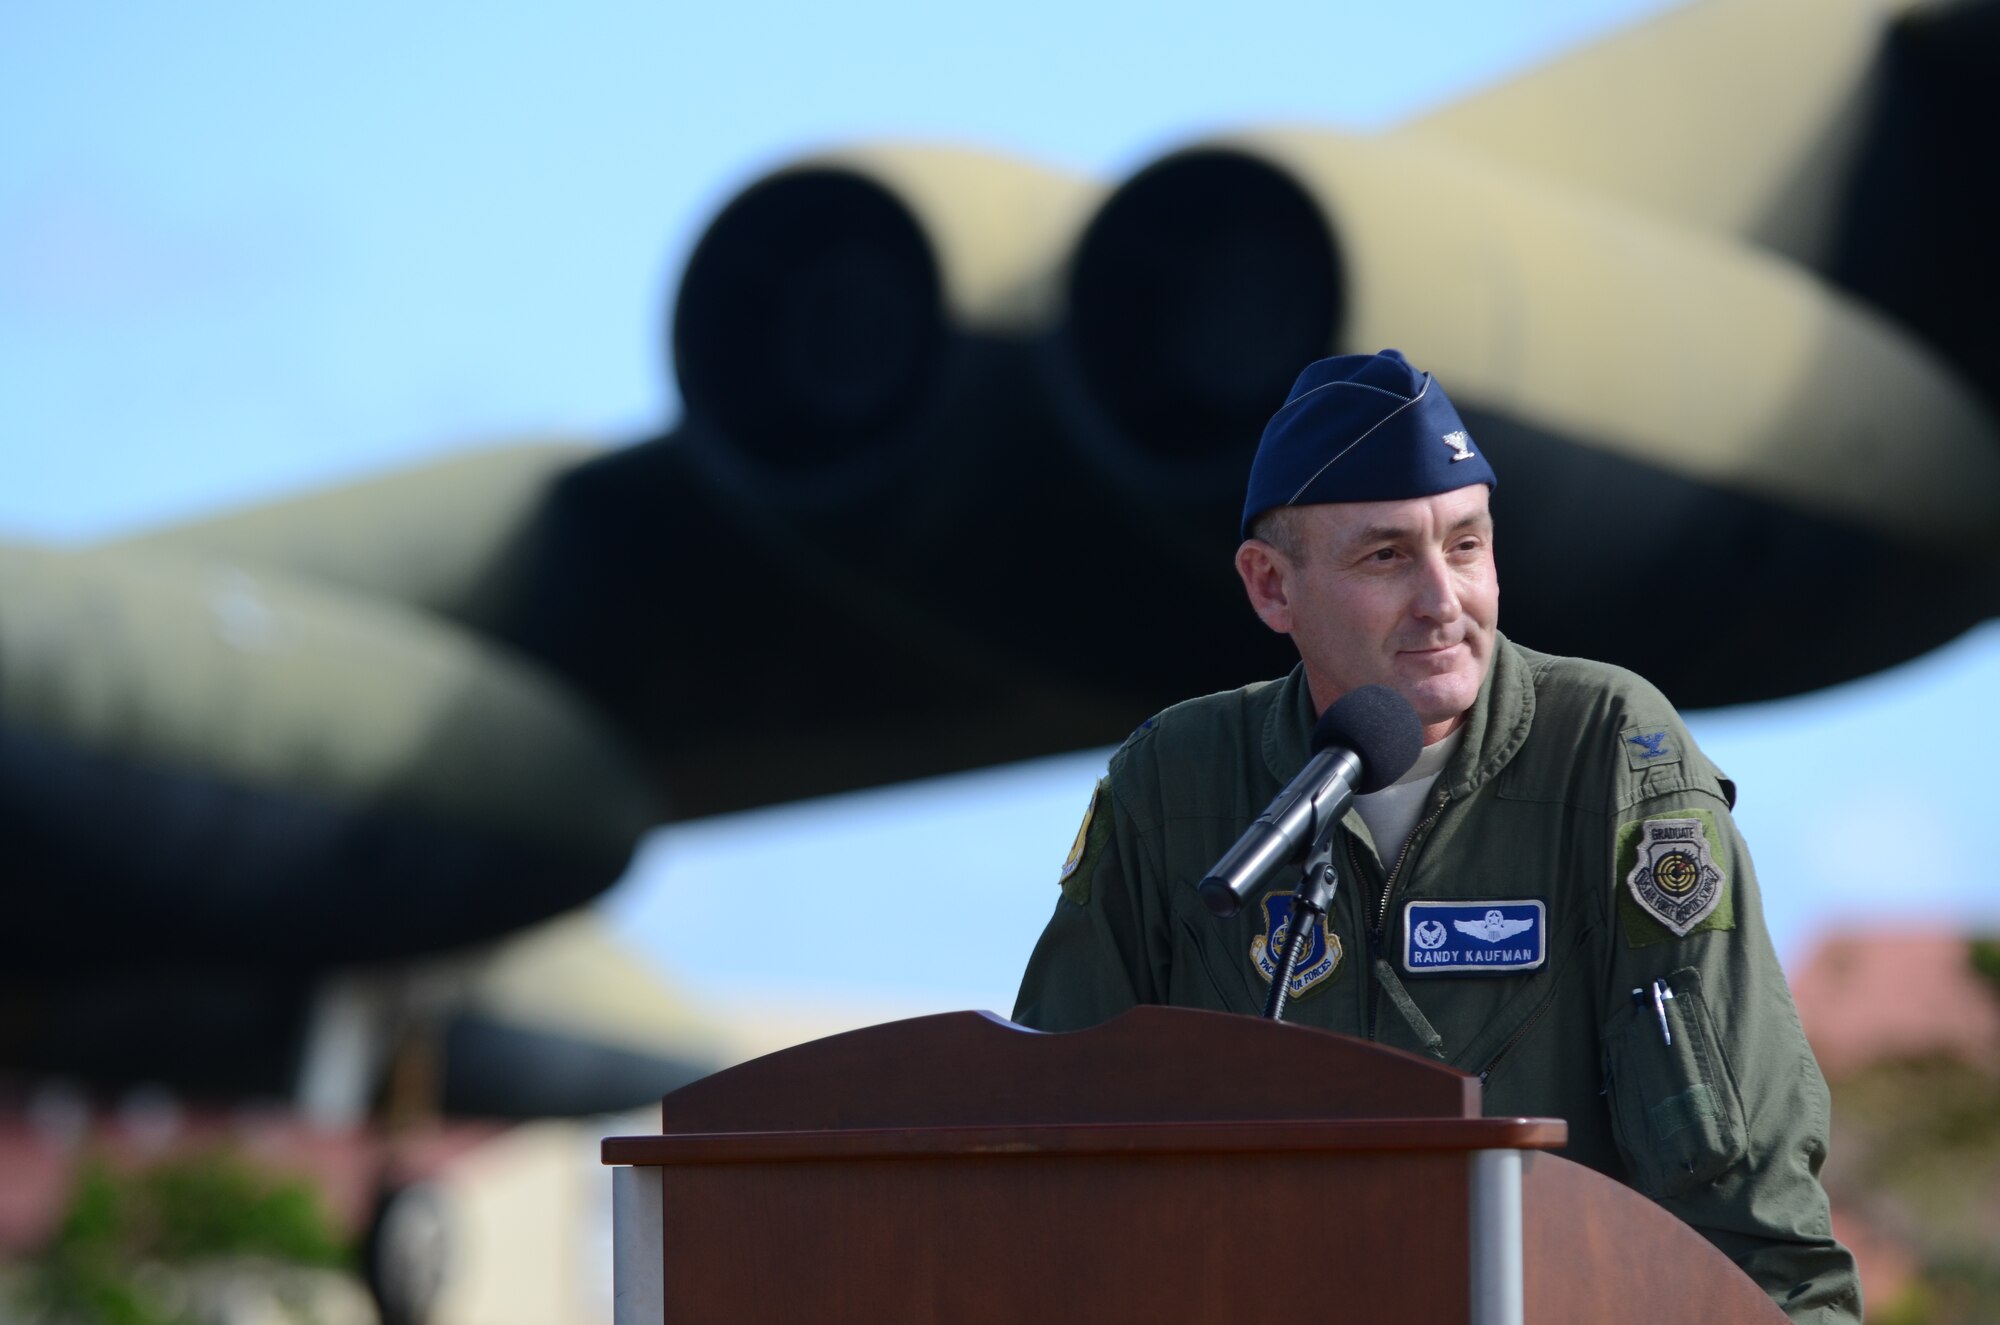 Col. Randy Kaufman, 36th Operations Group commander, speaks during the Operation Linebacker II Remembrance Ceremony at Andersen Air Force Base, Guam, Dec. 14. The ceremony commemorated the 40th anniversary of the Linebacker II campaign that led to the end of the Vietnam War. (U.S. Air Force photo by Senior Airman Benjamin Wiseman/Released)